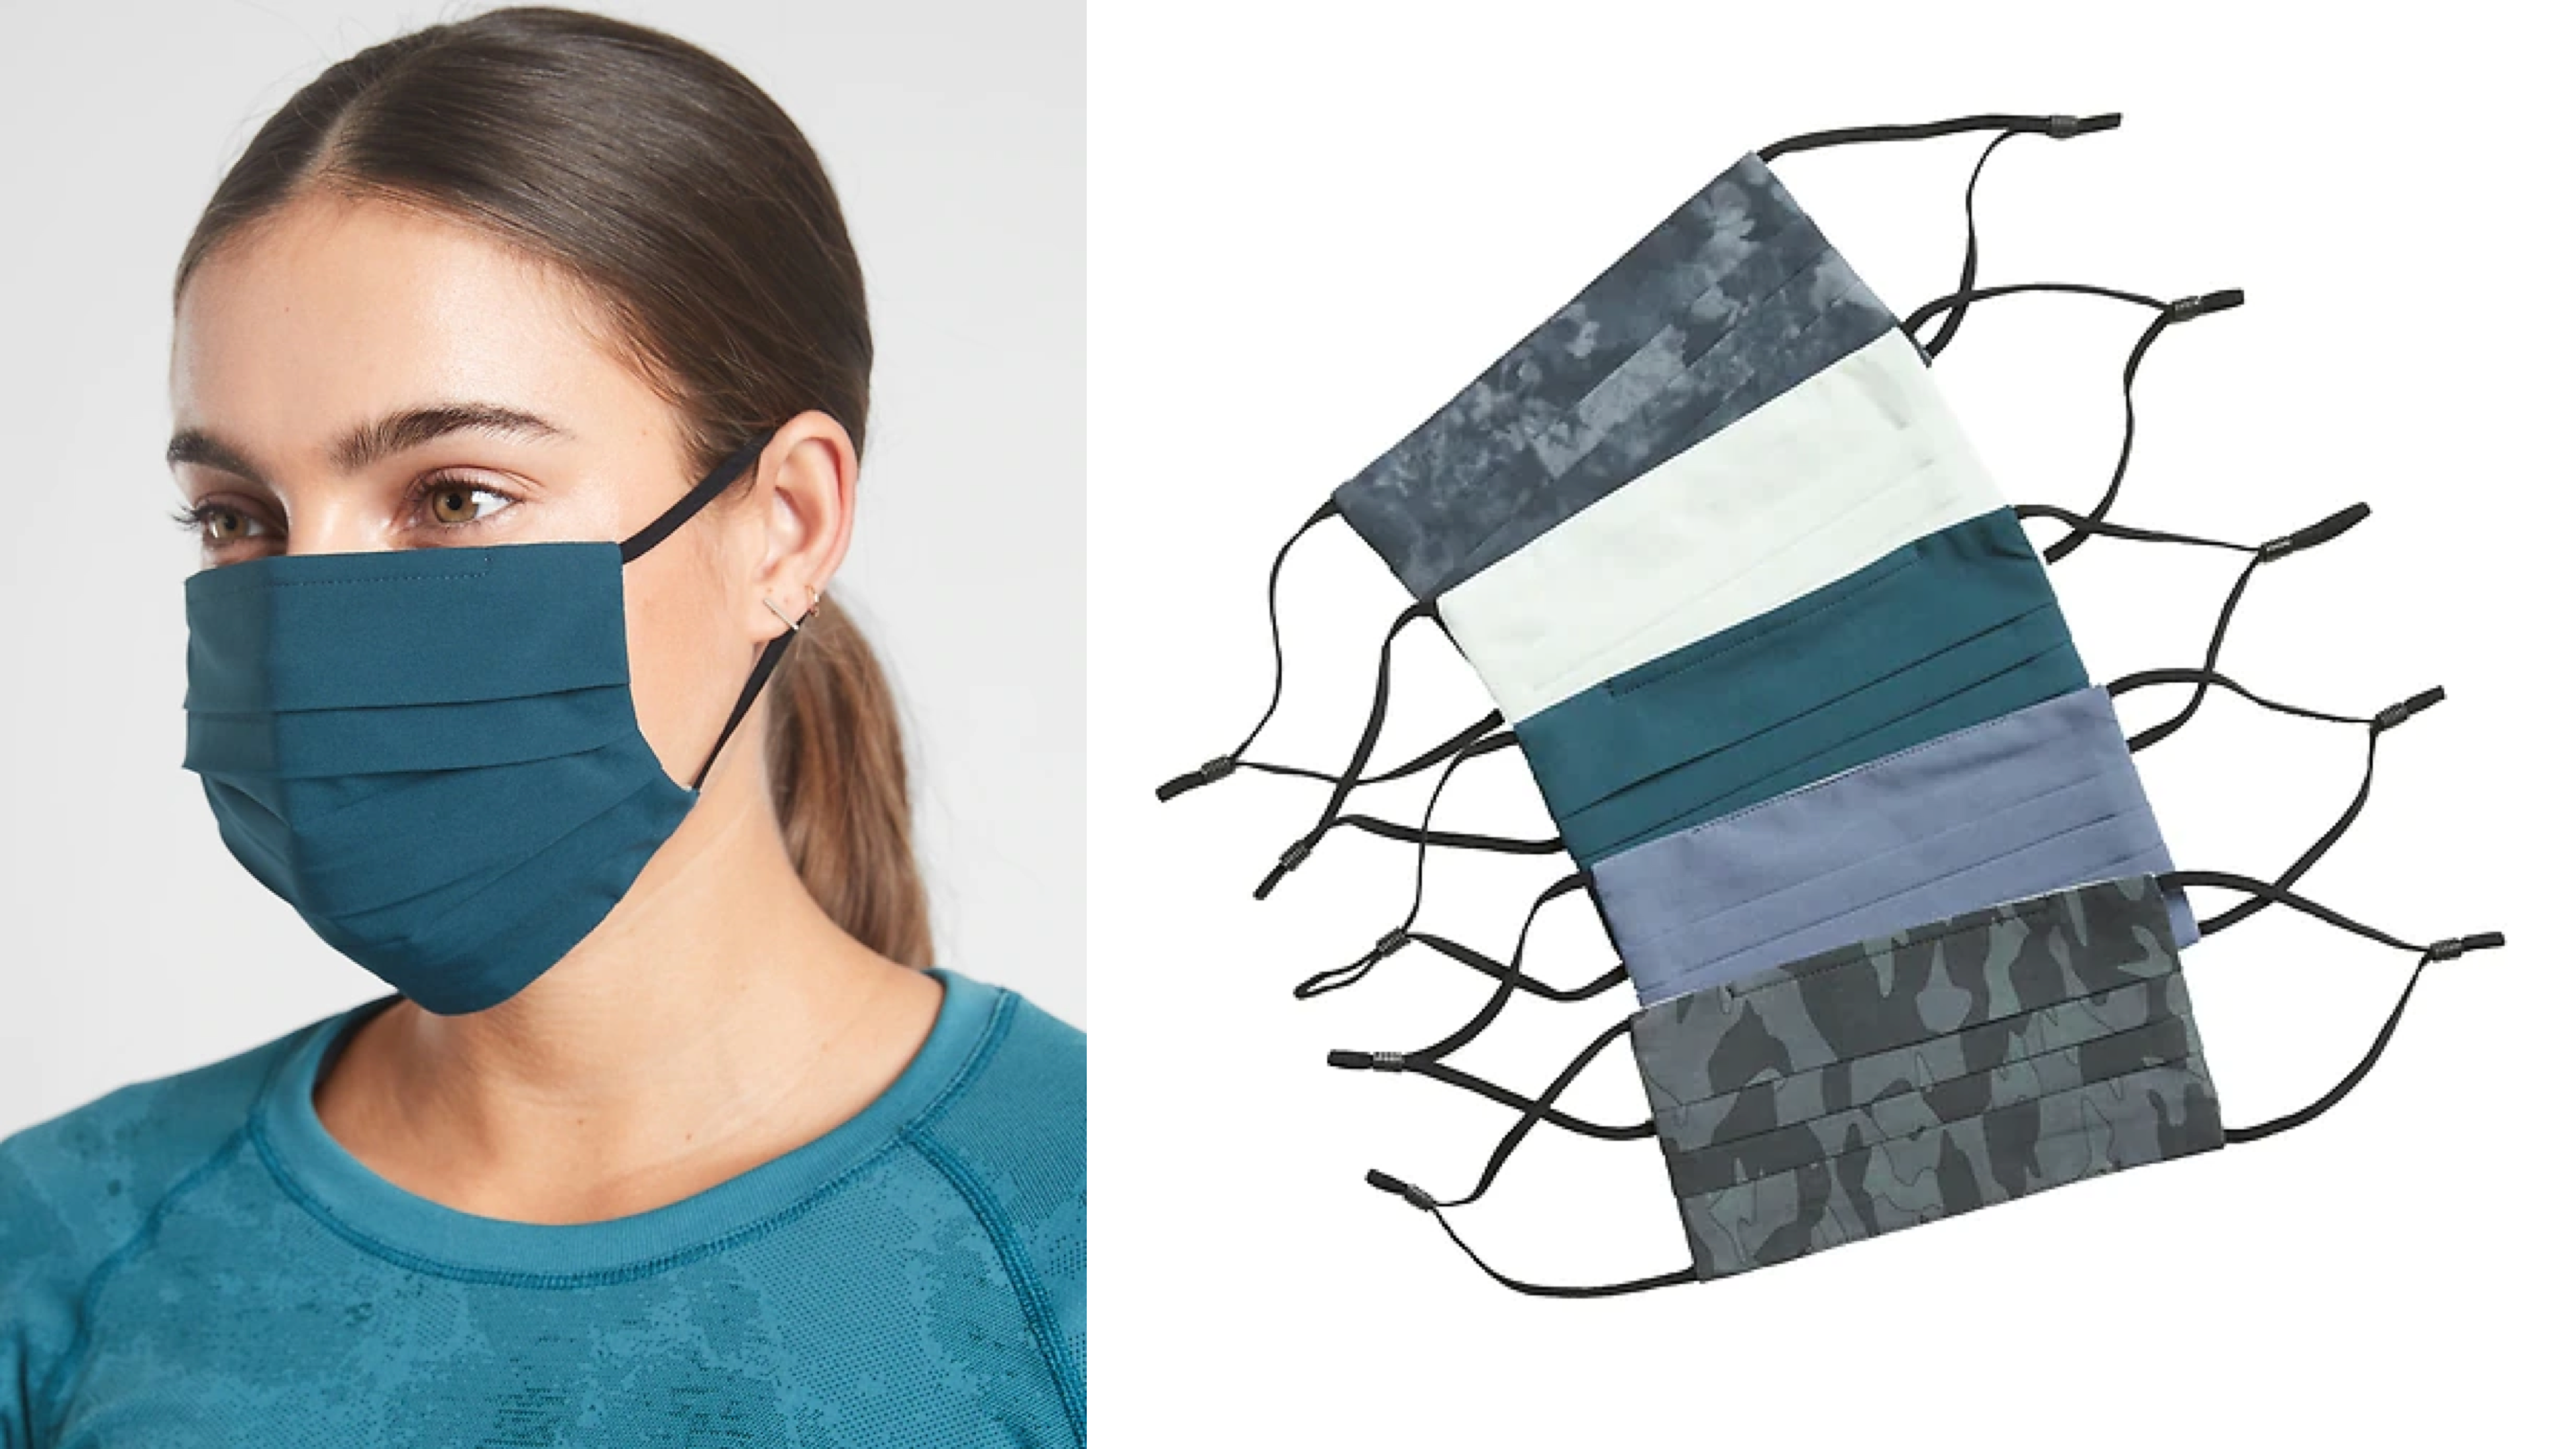 soft face masks ideal for working out, come in multiple patterns, colors, and sizes